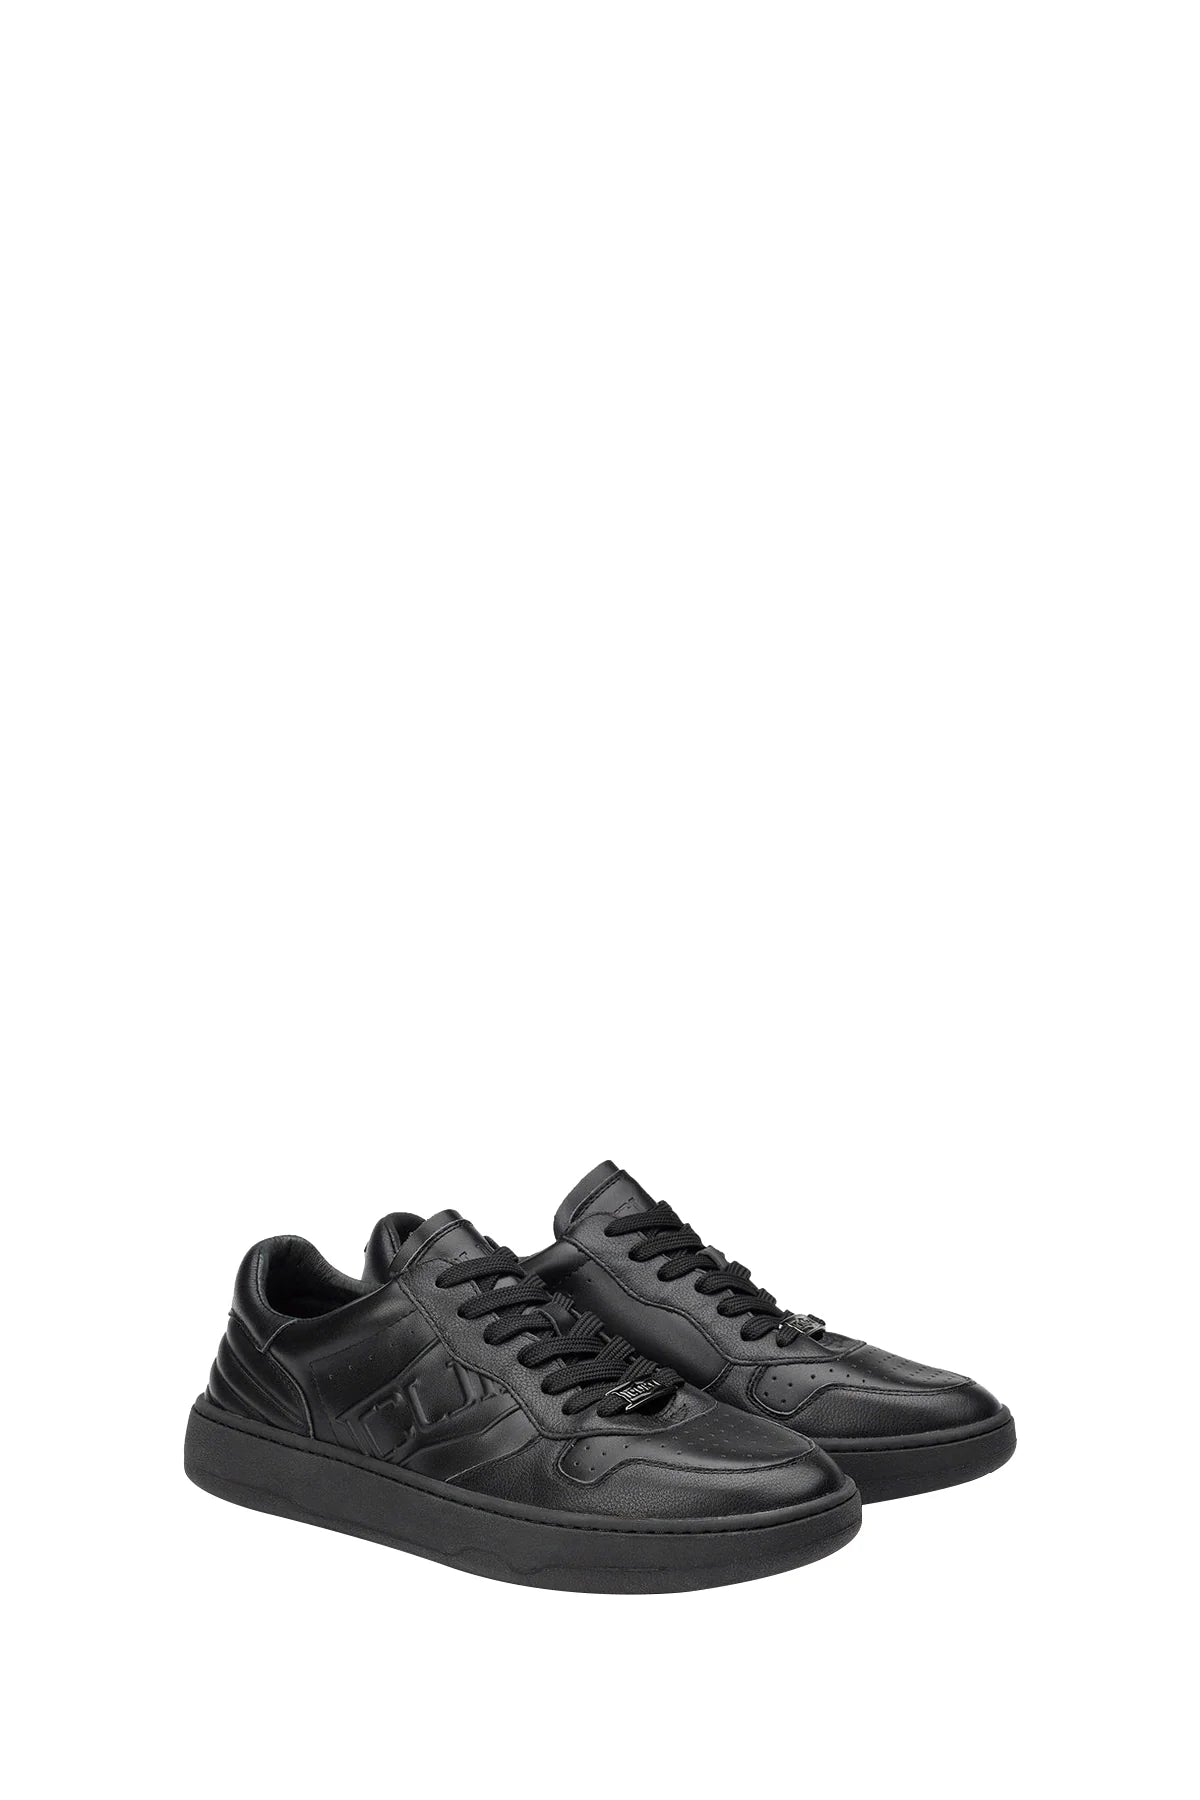 SNEAKERS IRON 3992 LOW M LEATHER BLACK CULT UOMO